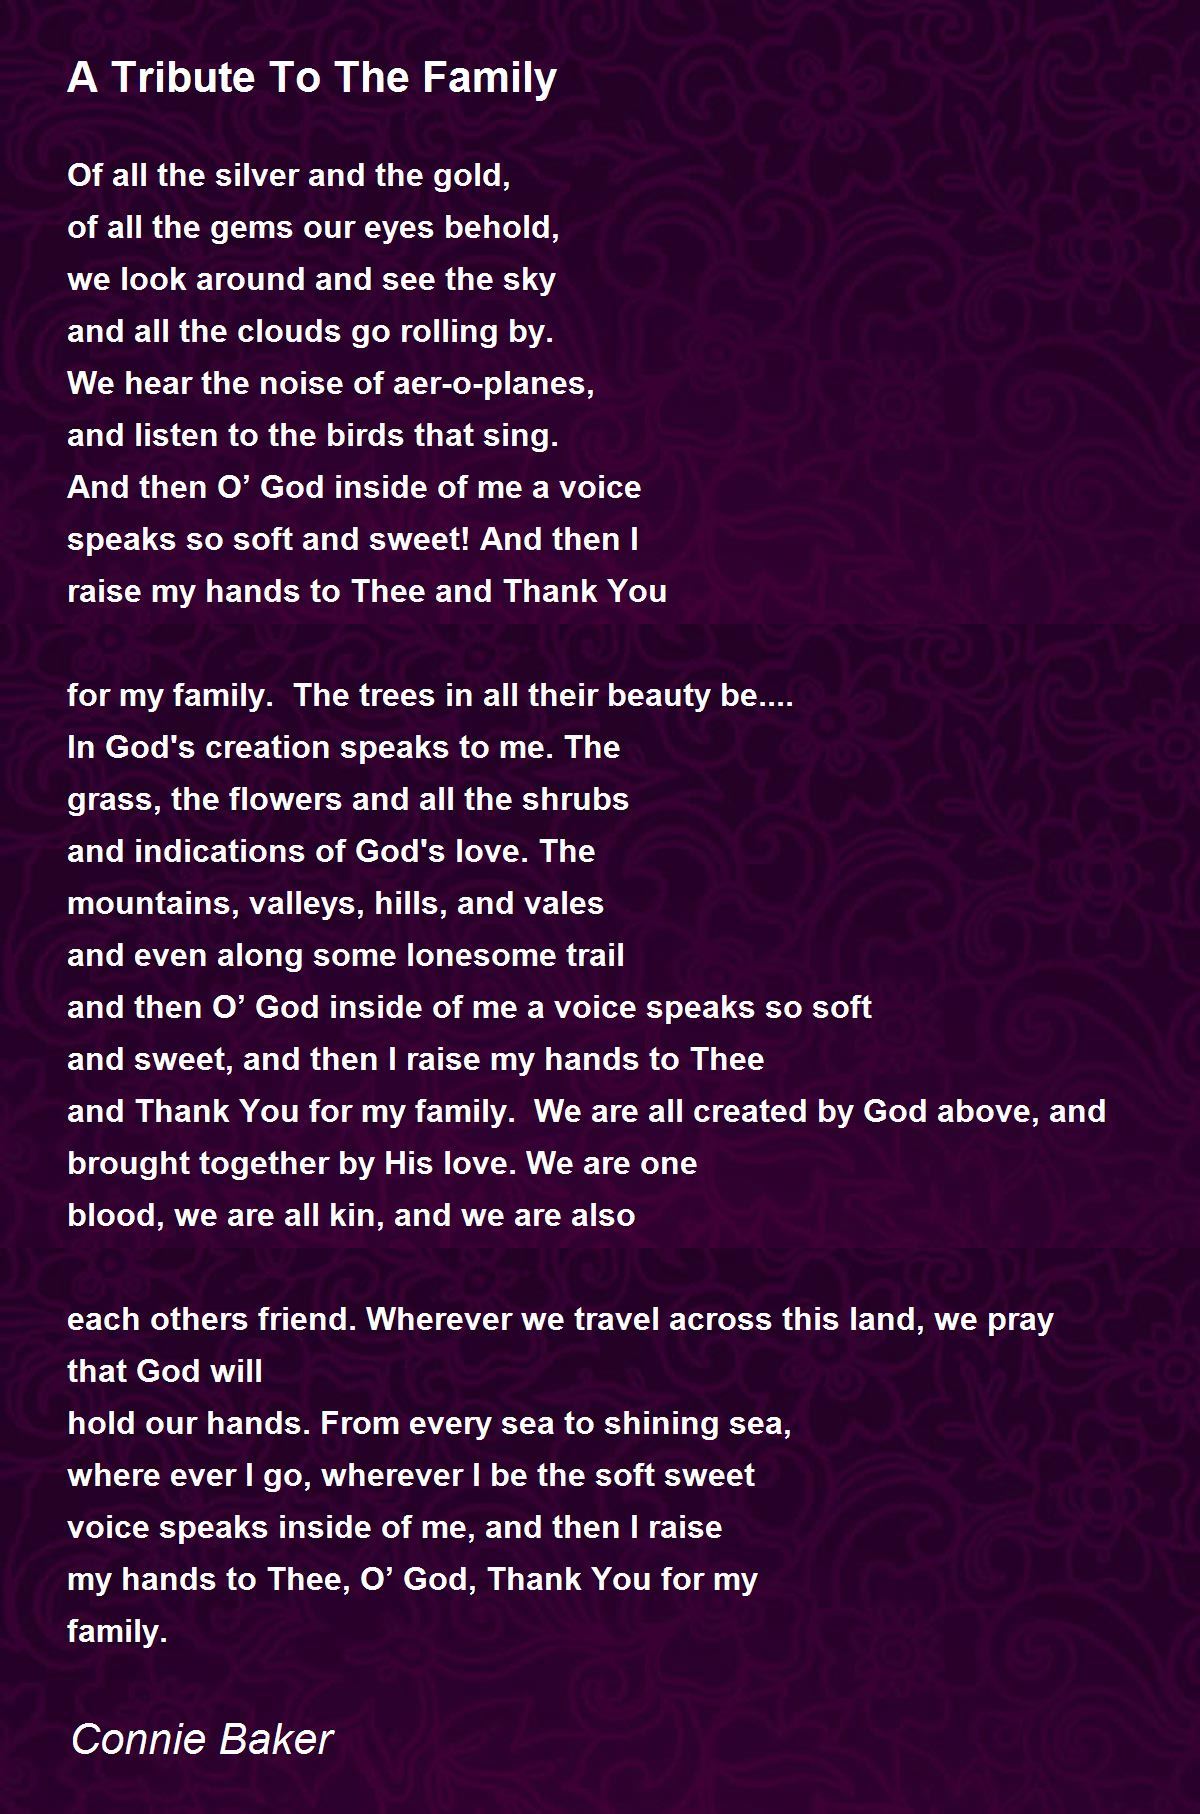 A Tribute To The Family - A Tribute To The Family Poem by Connie Baker